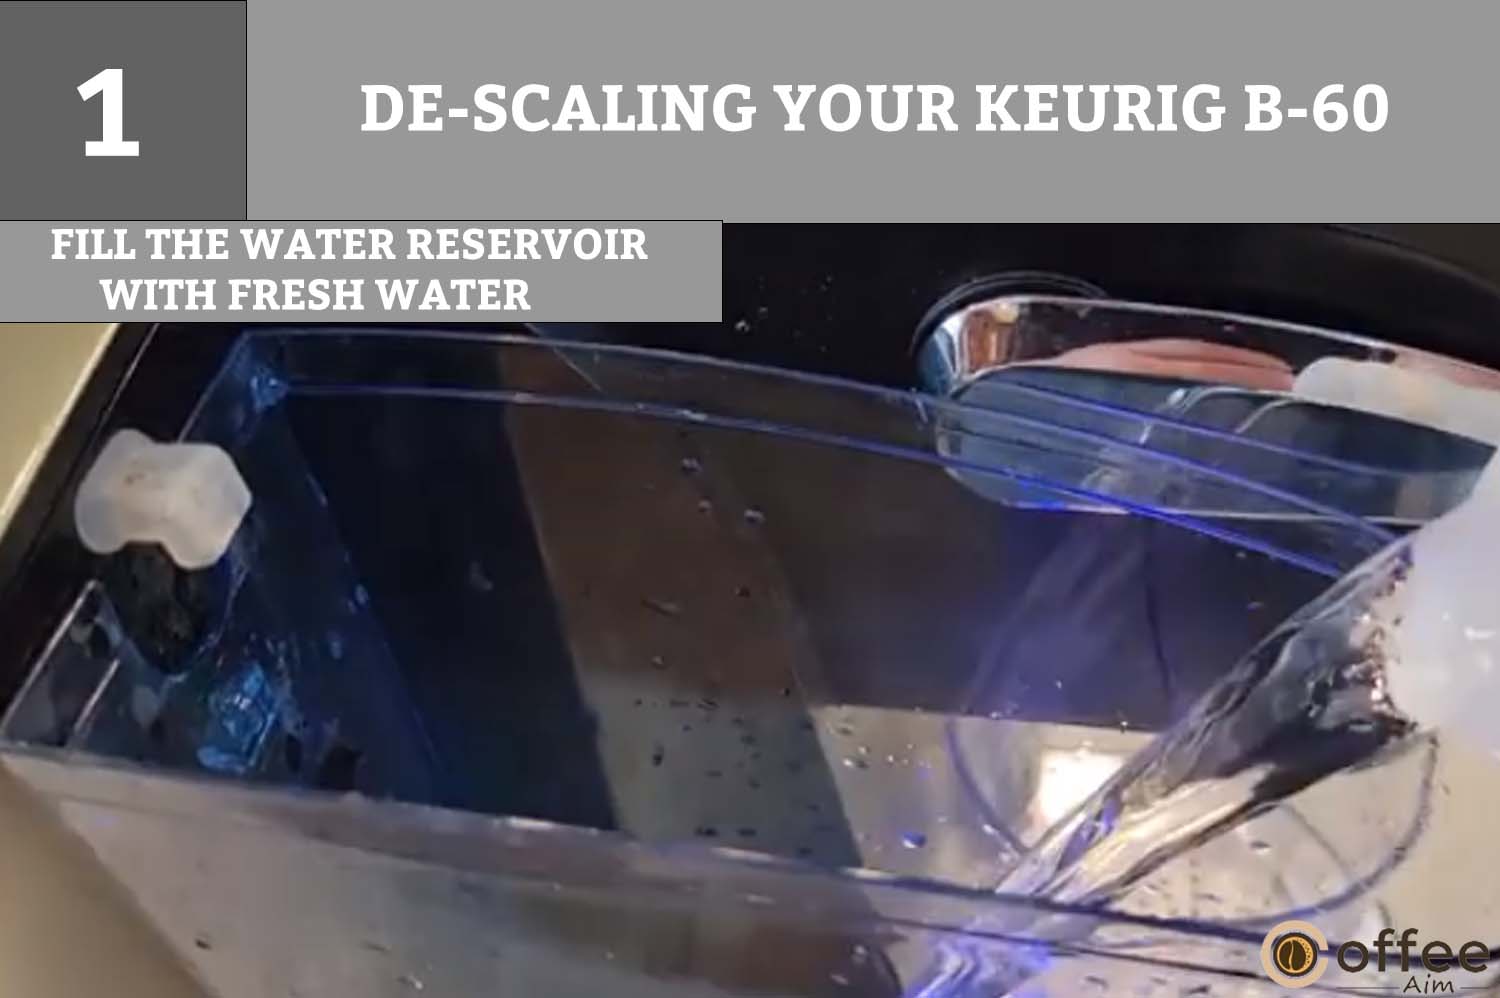 Fill the Water Reservoir with fresh water to prepare your Keurig brewer for the next use.